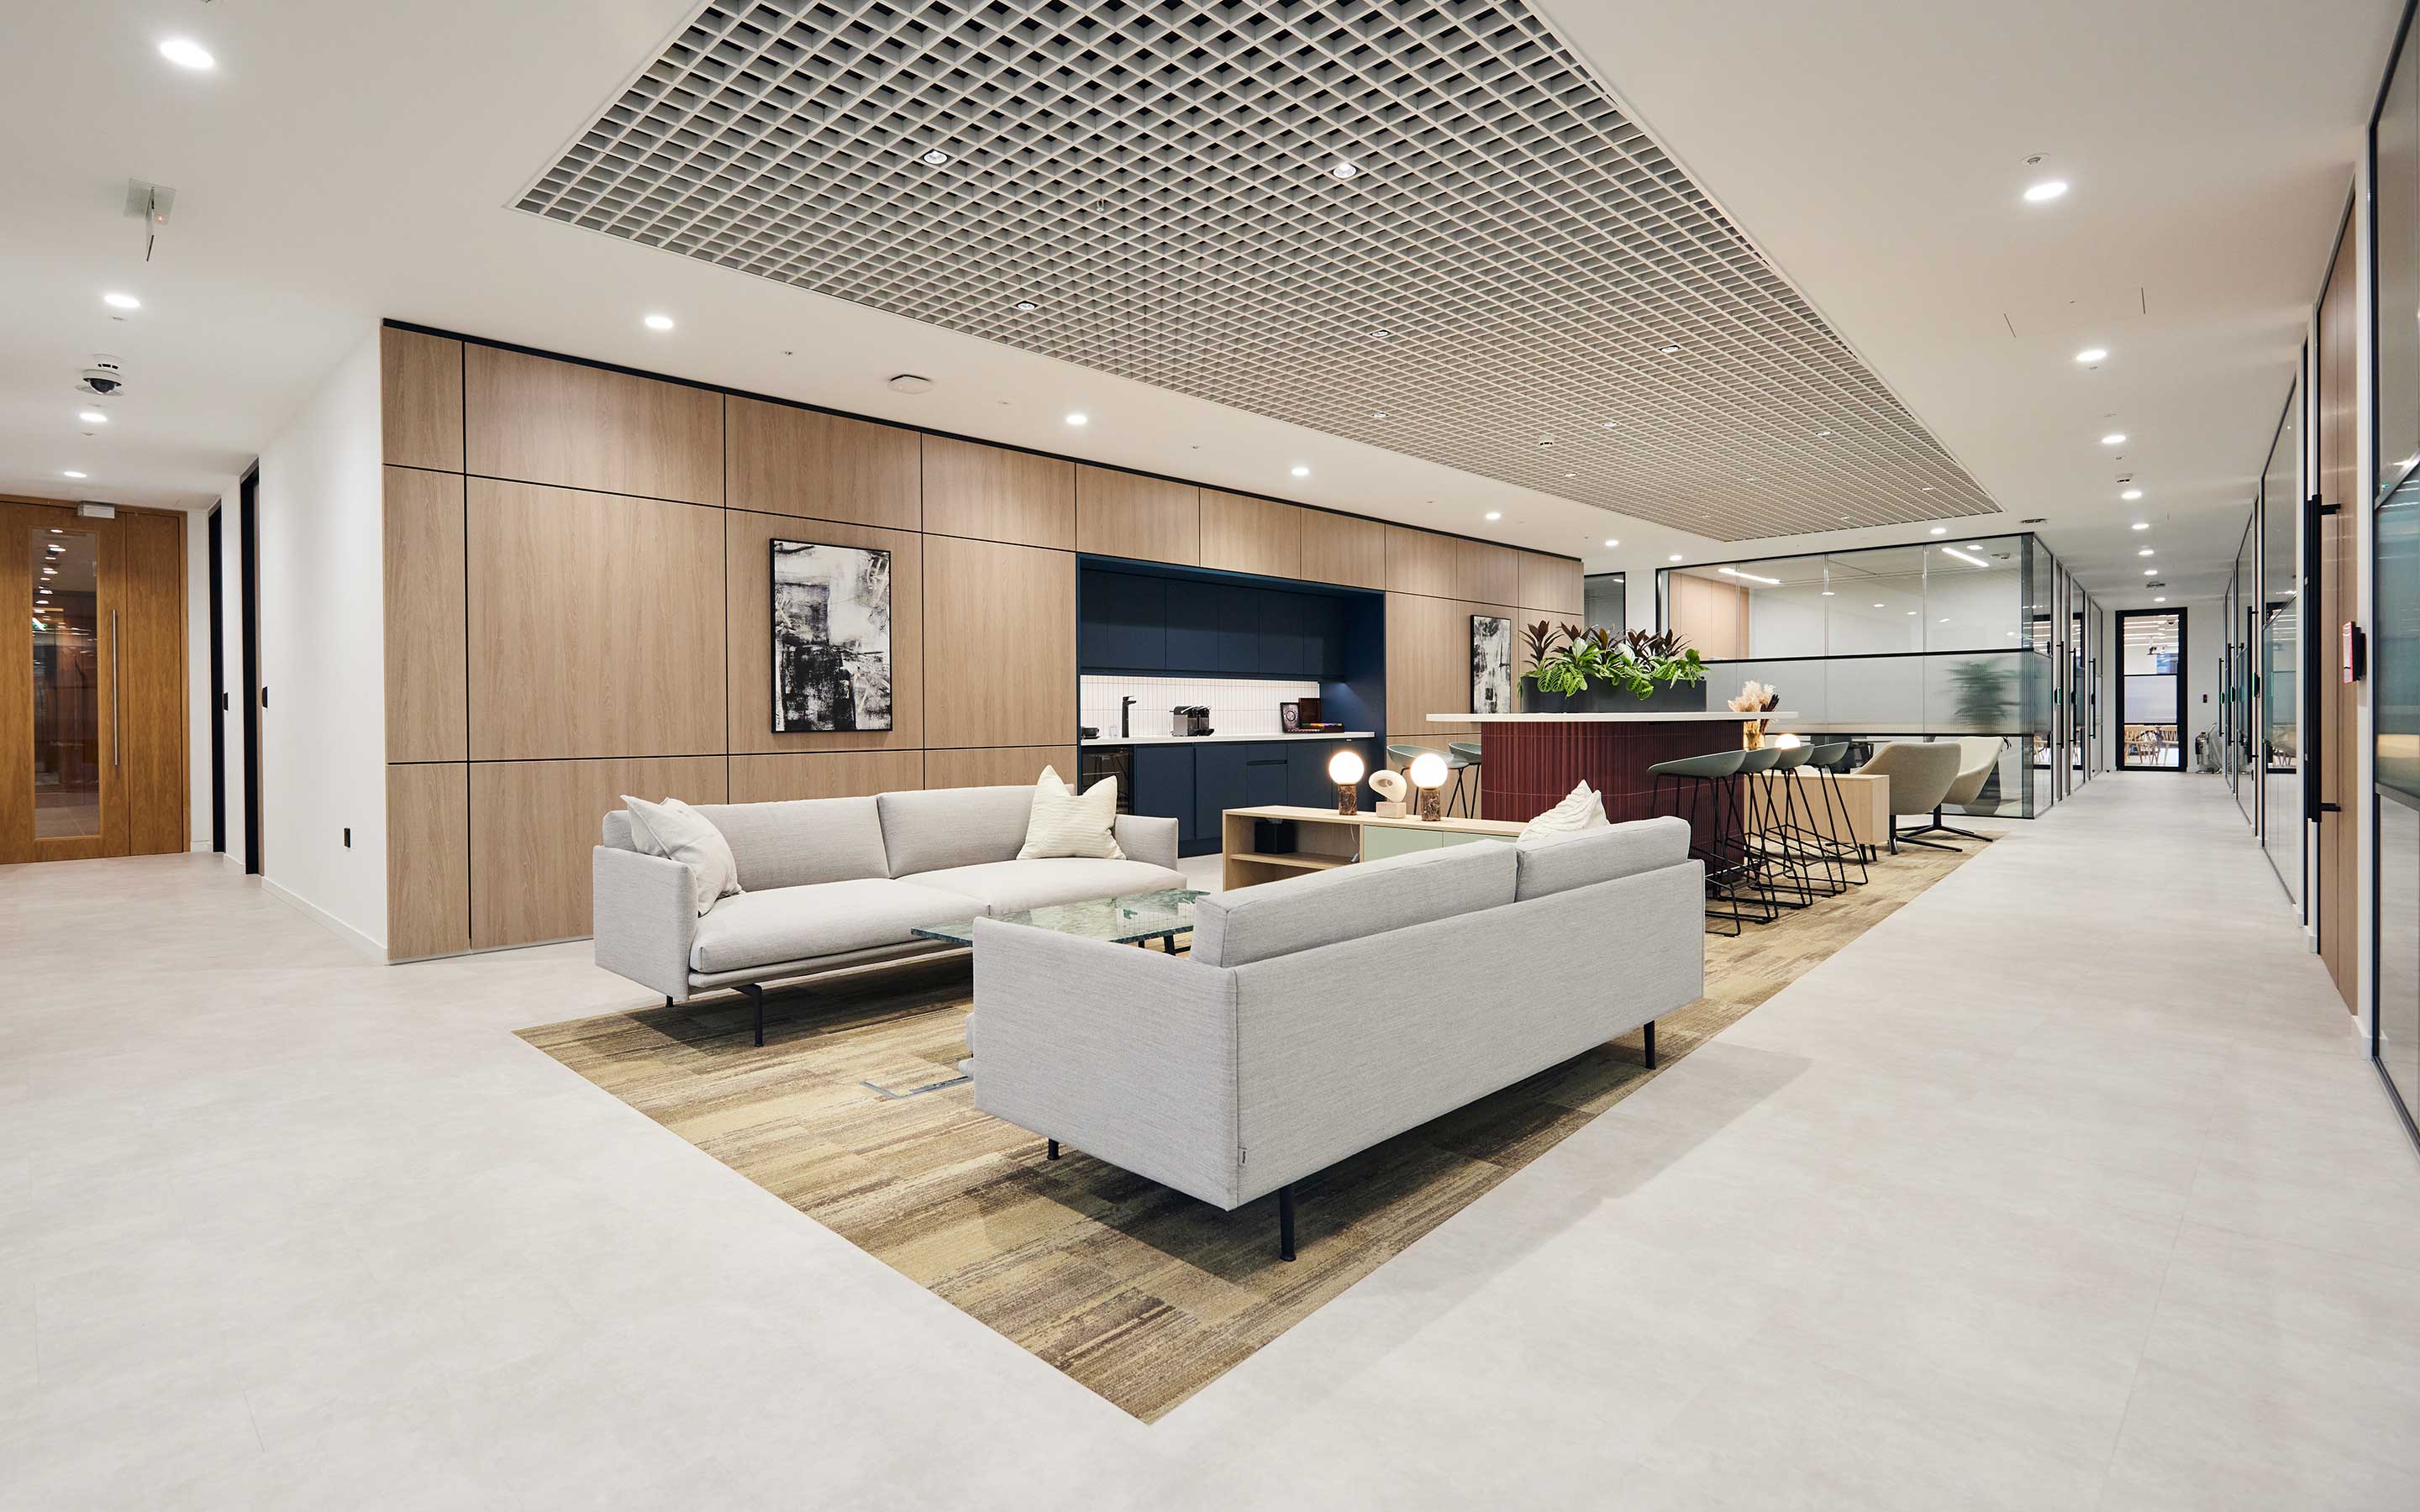 Sleek client waiting area in high-end London office with soft furnishings, bespoke joinery, and plush carpets